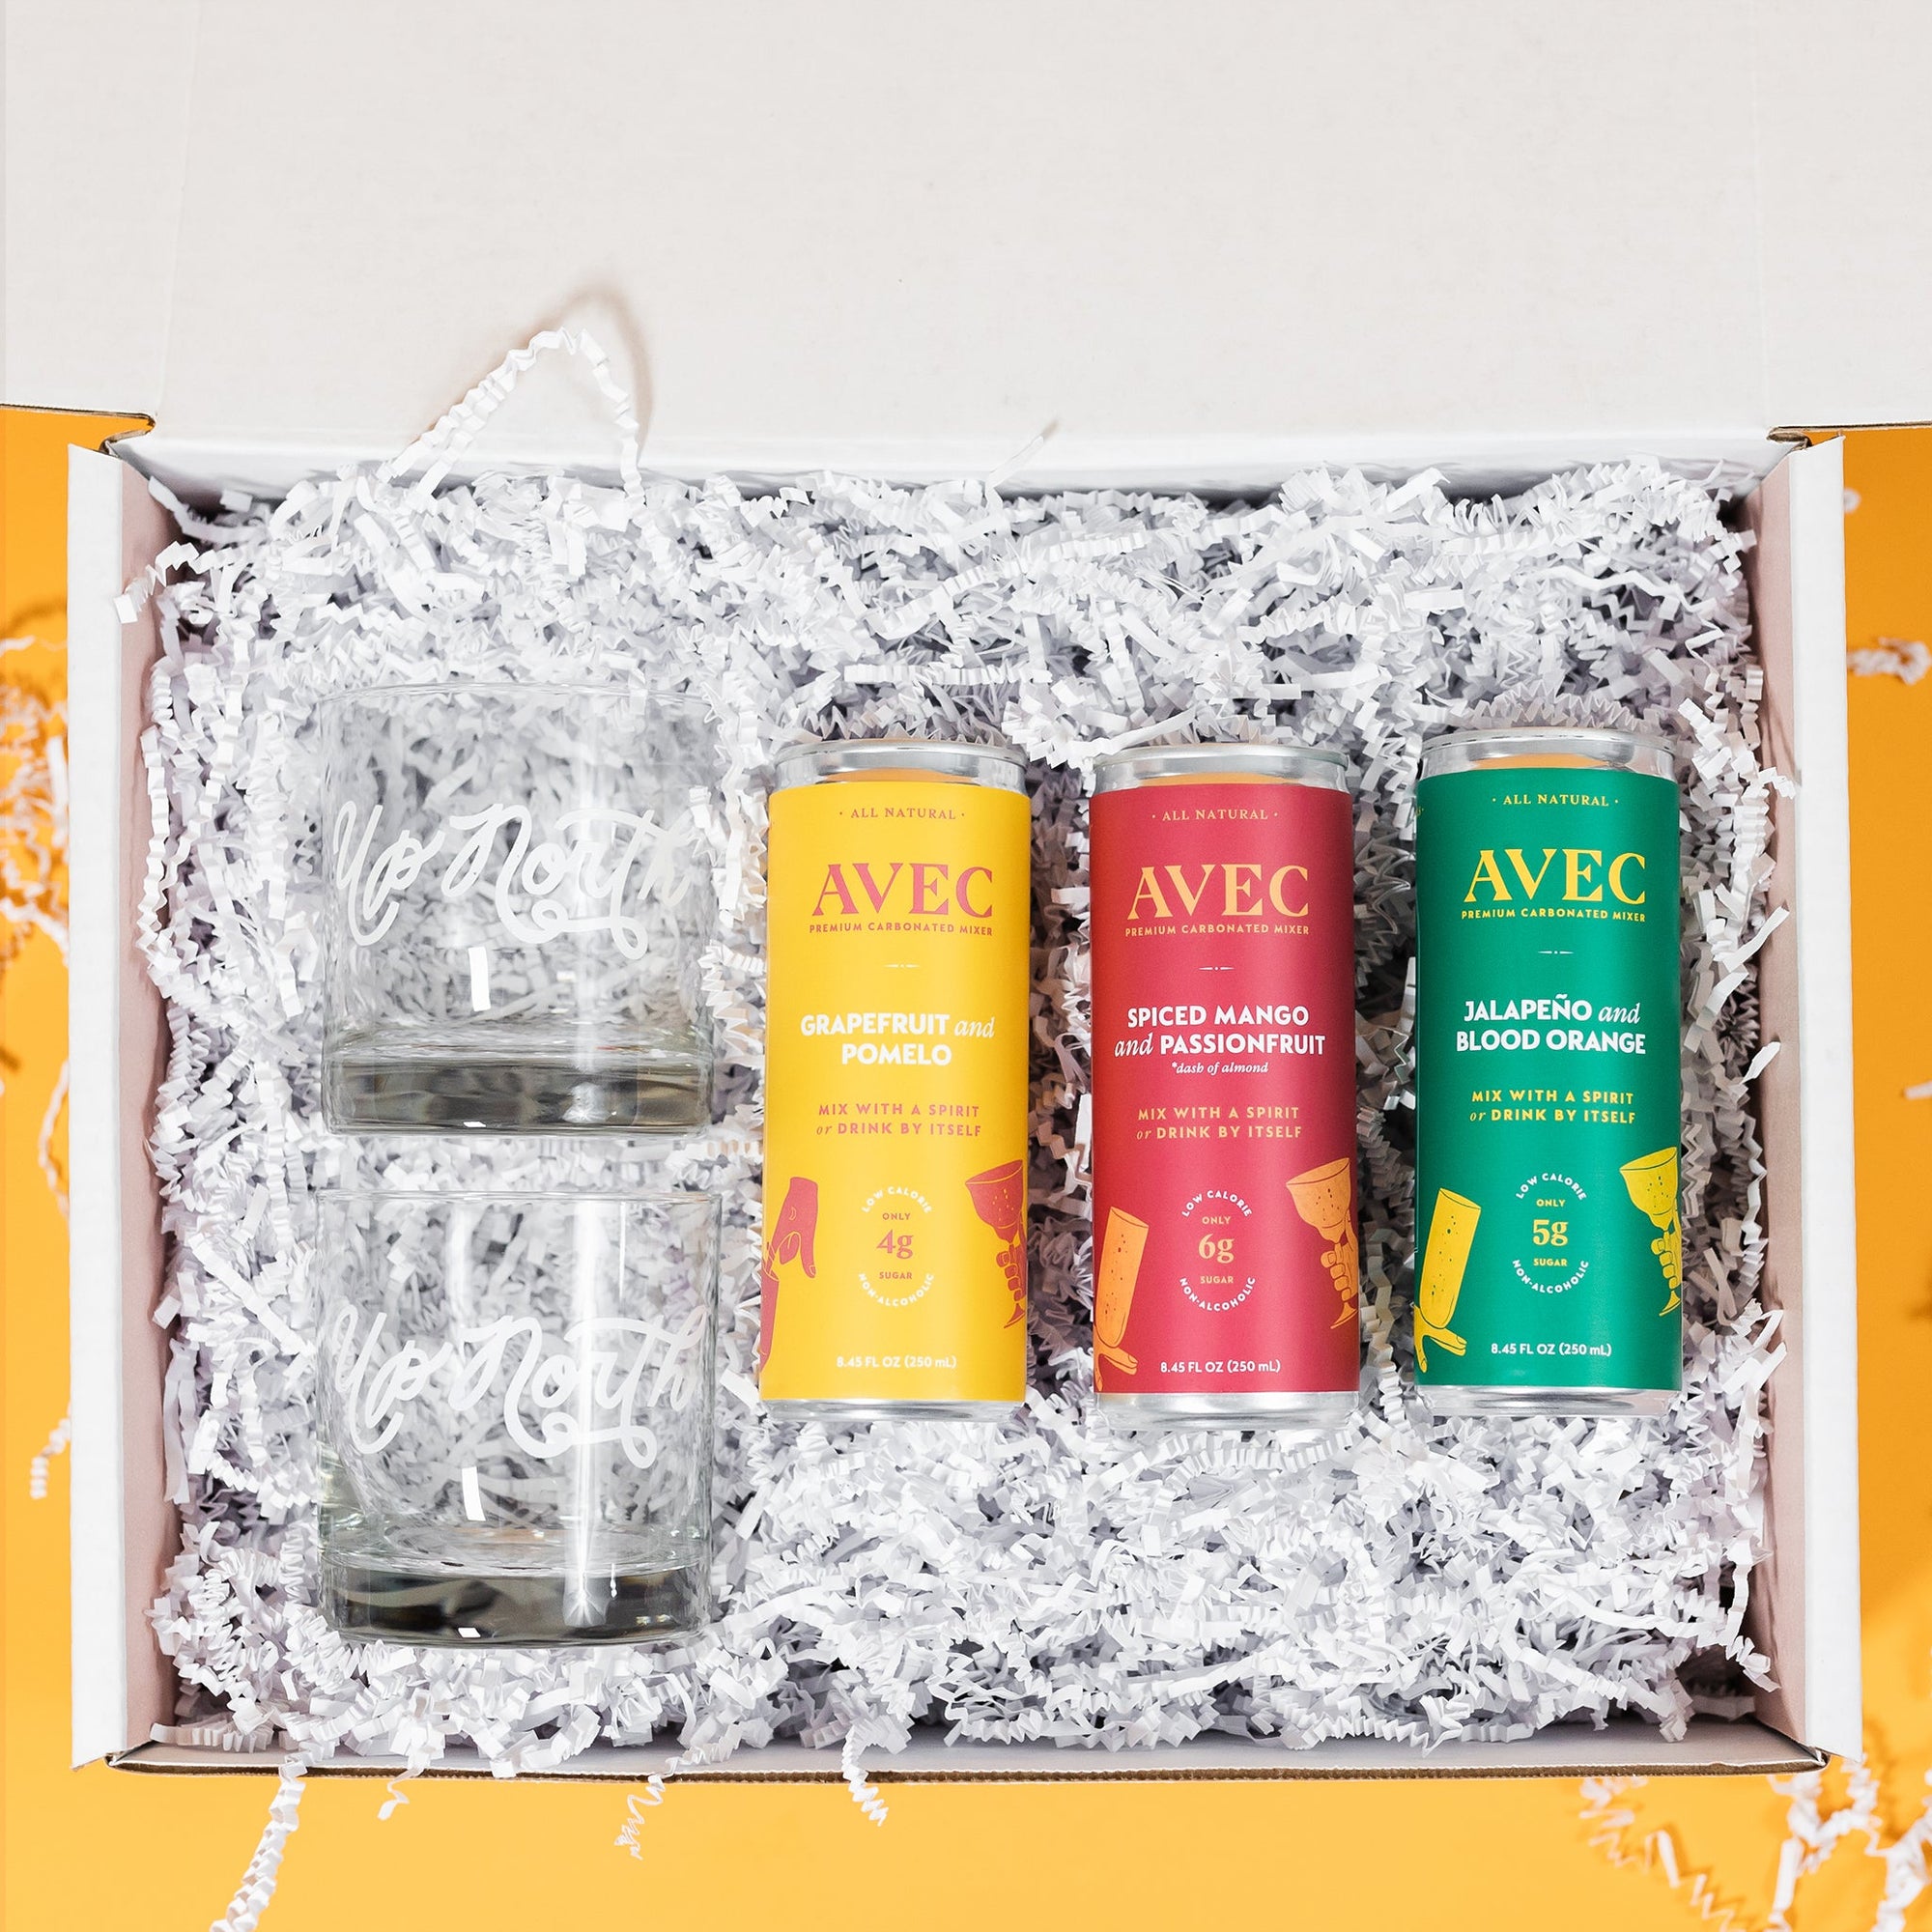 On a sunny mustard background sits a box with two high ball glasses and three cans of carbonated mixers with white crinkle underneath. The two glasses are clear with "Up North" handwritten in white. There are three cans of AVEC premium carbonated mixers. The mustard yellow can is Grapefruit and Pomelo (4g sugar). The fuchsia can is Spiced Mango and Passionfruit (6g sugar) and the green can is Jalapeno and Blood Orange (5g sugar). 